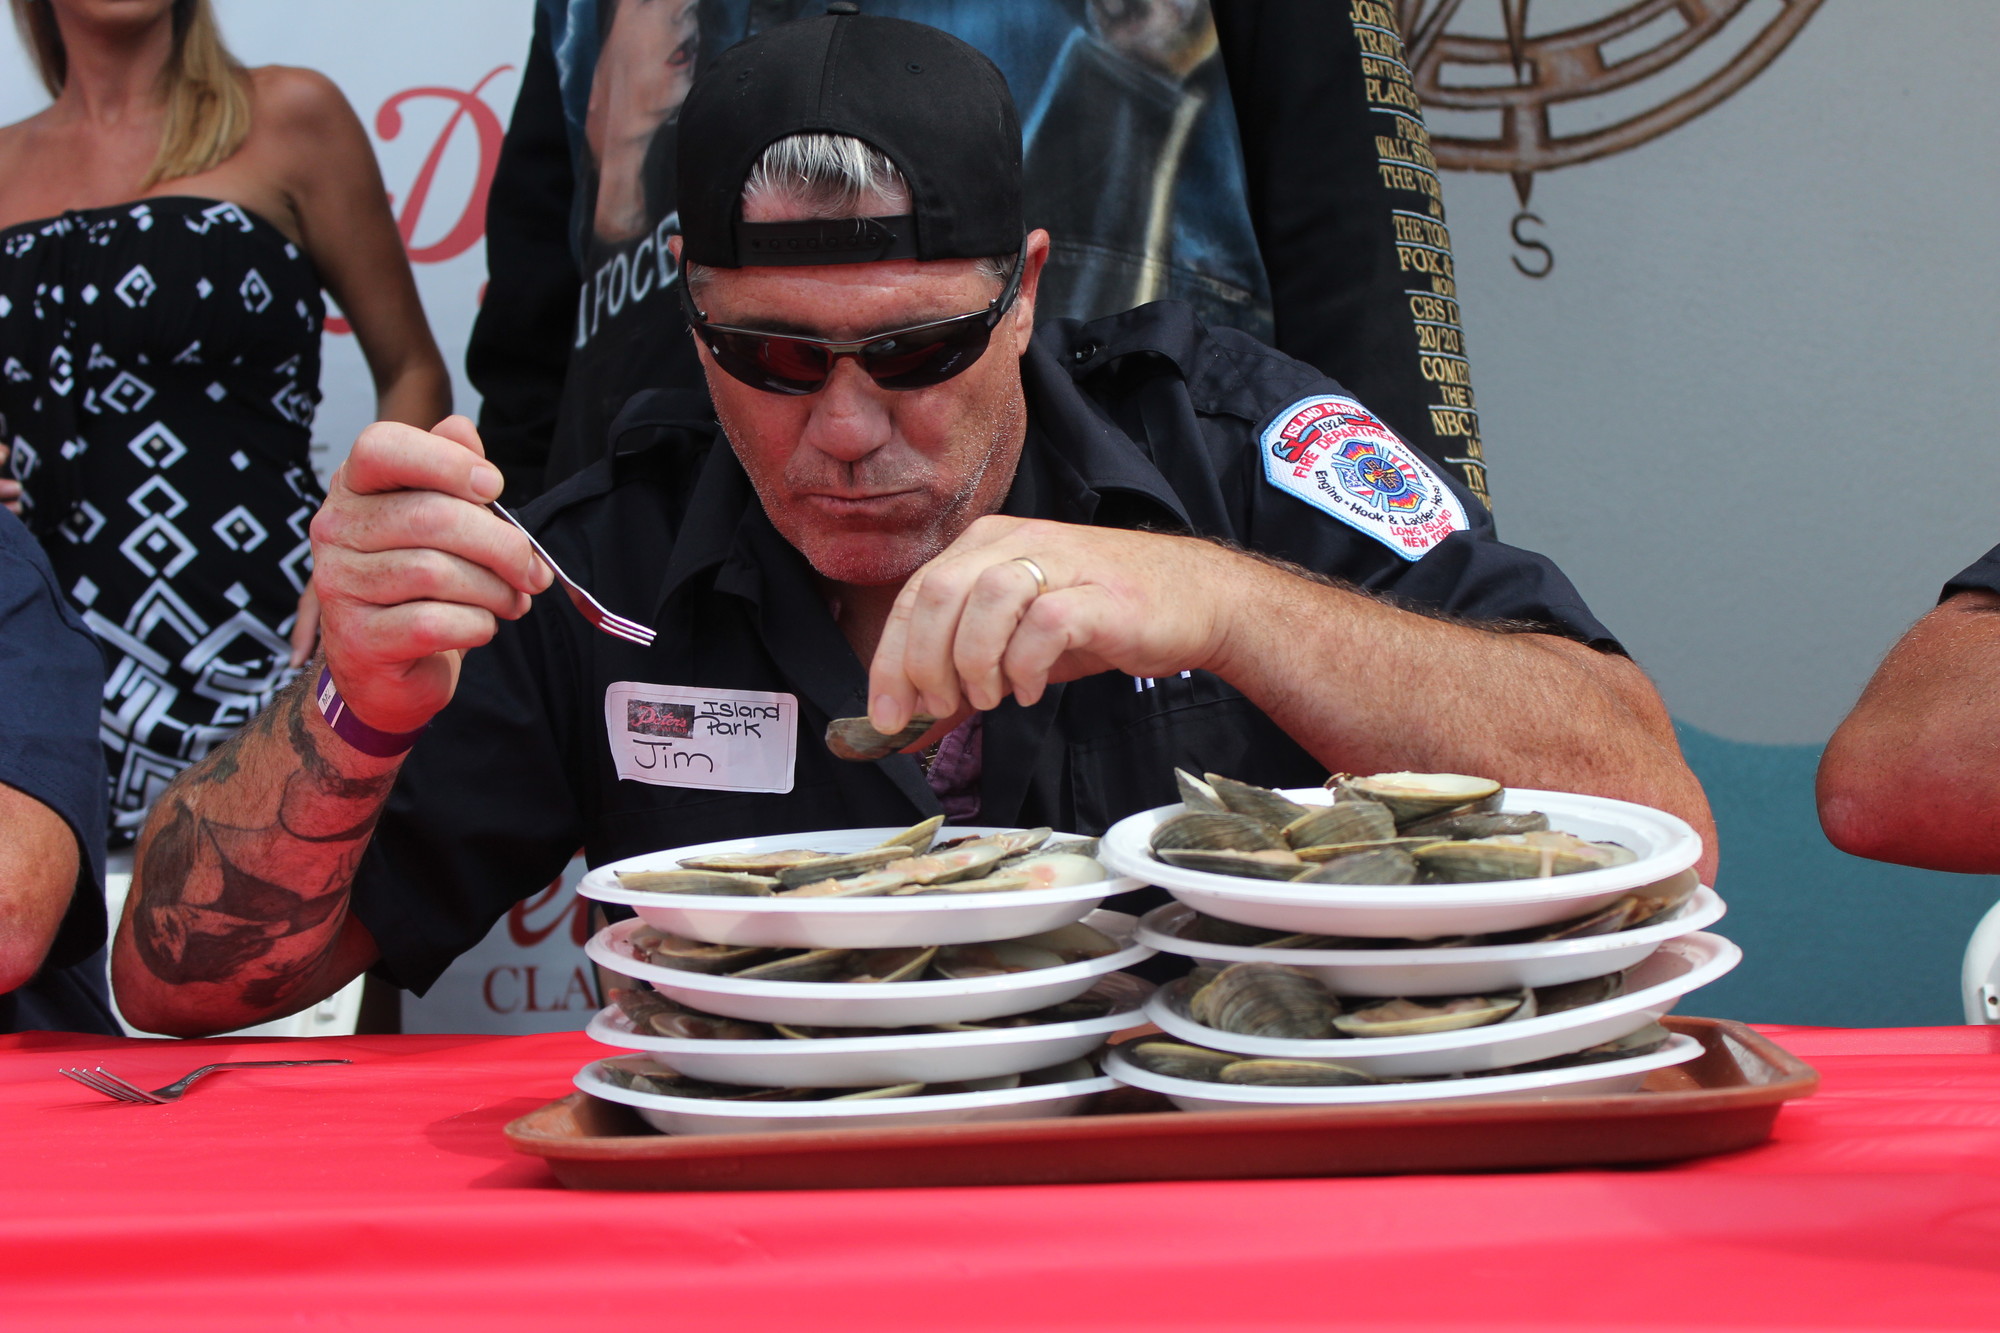 Jim Sarro, representing the Island Park Fire Department, dug into a pile of eight dozen clams last Sunday at the Peter’s Clam Bar Clam Eating Contest.